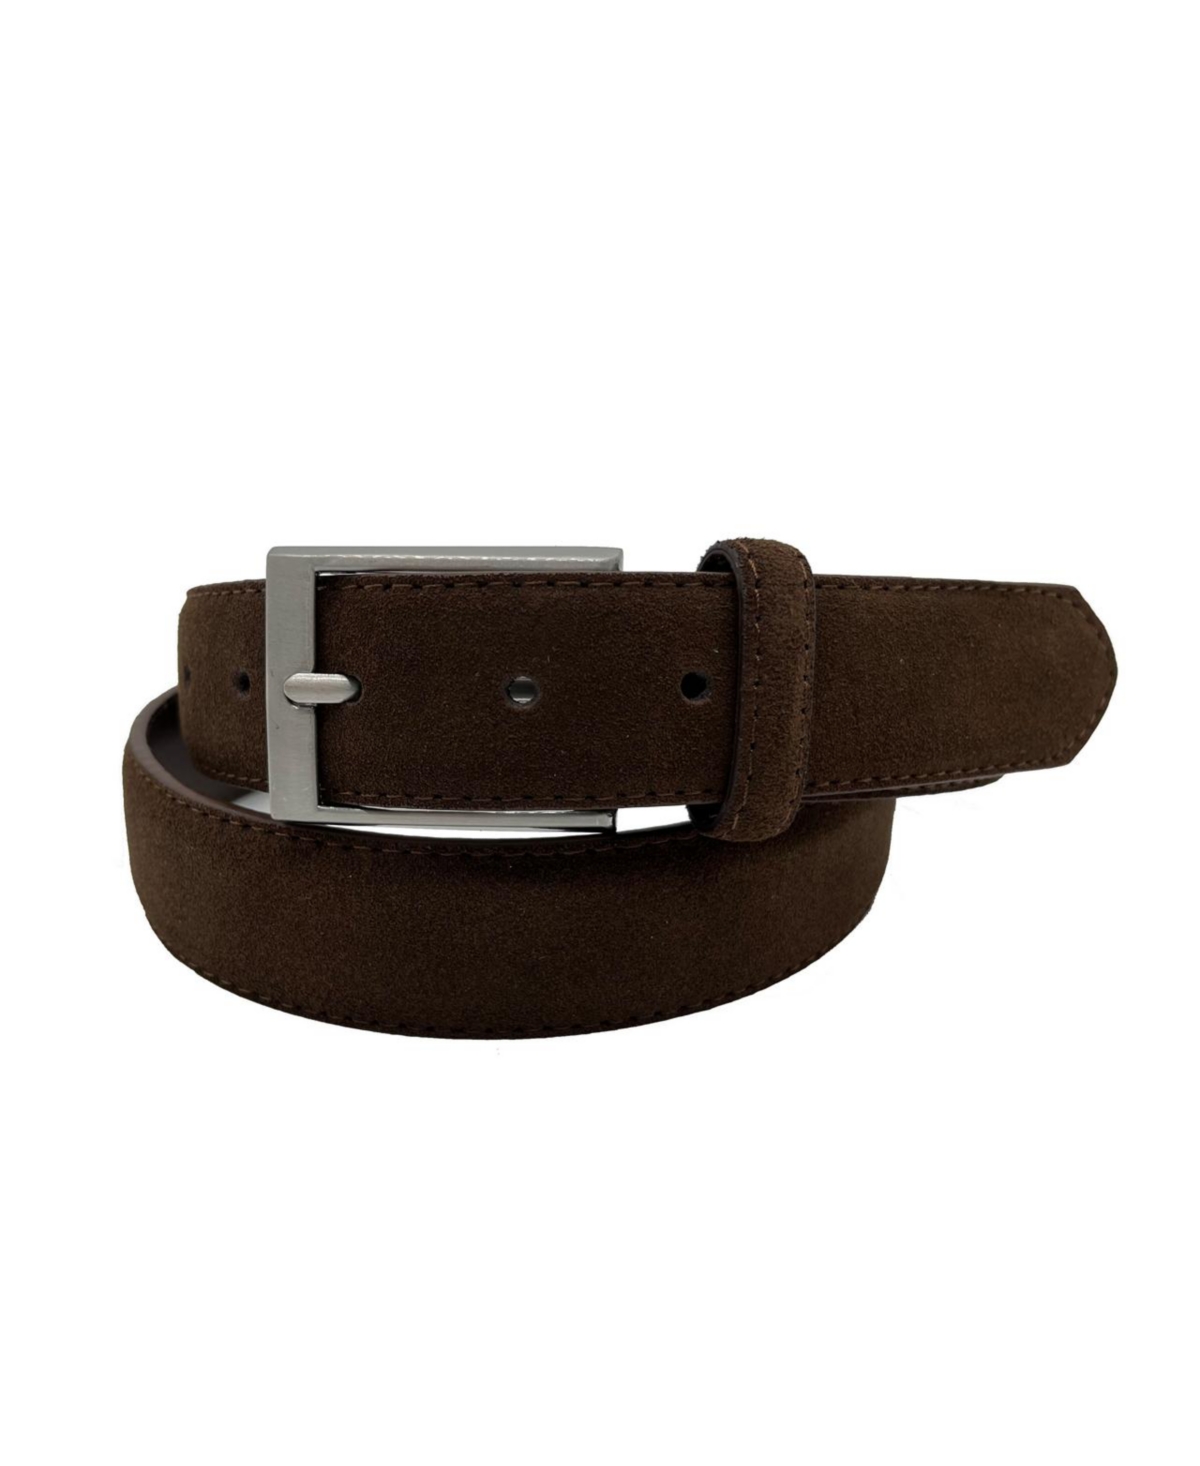 Clothing Men's Suede Leather 3.5 Cm Belt - Chocolate